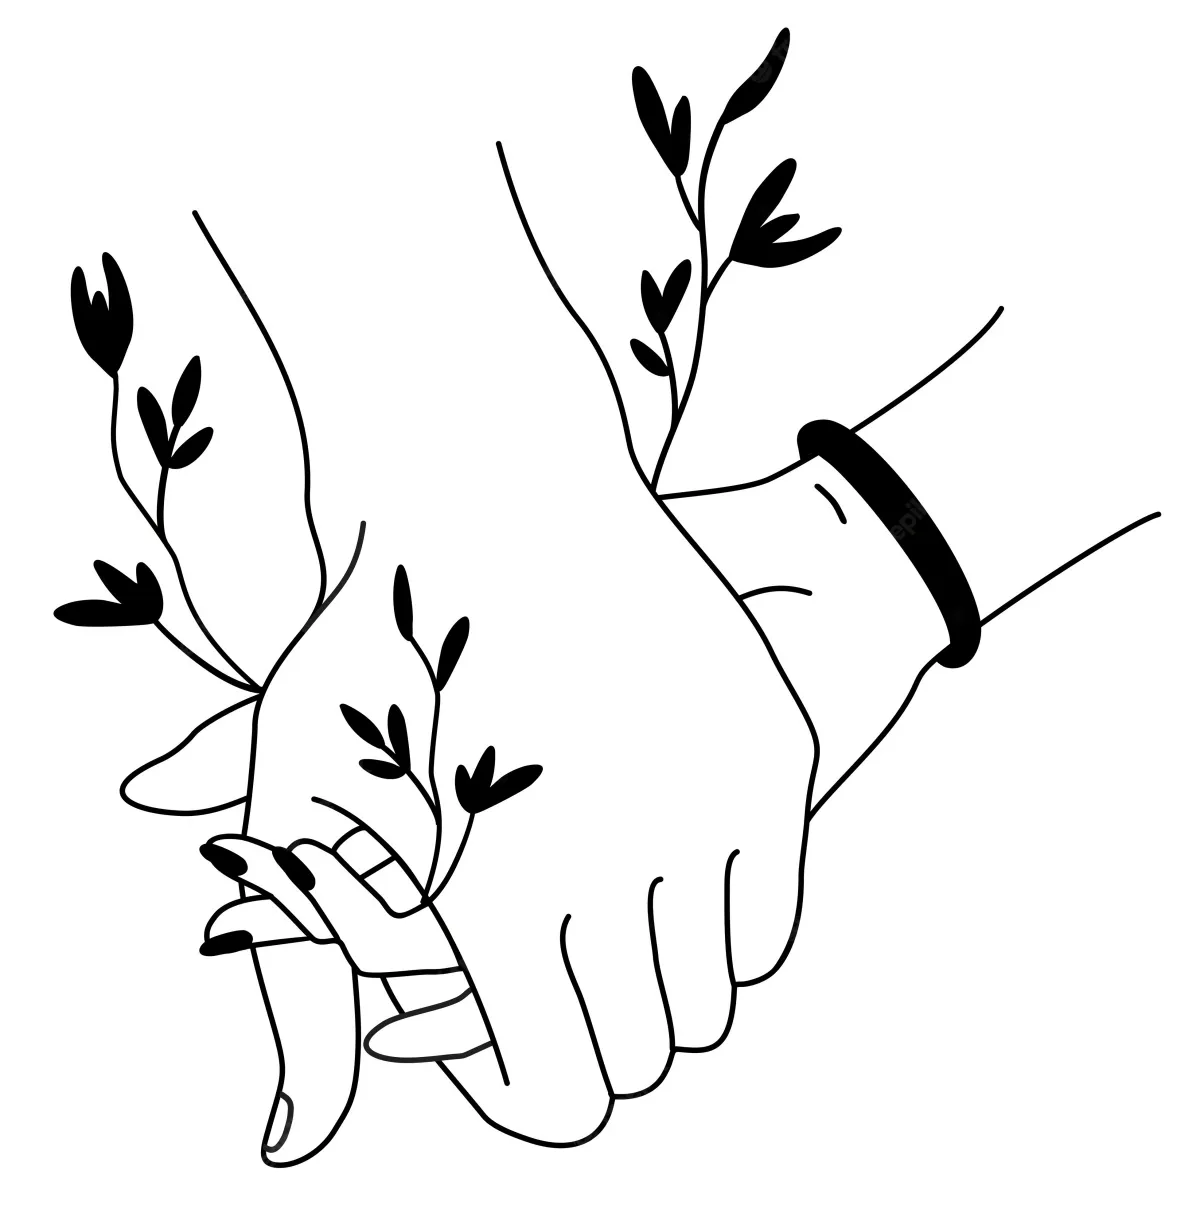 both hands express a strong unity with the black on white graphic